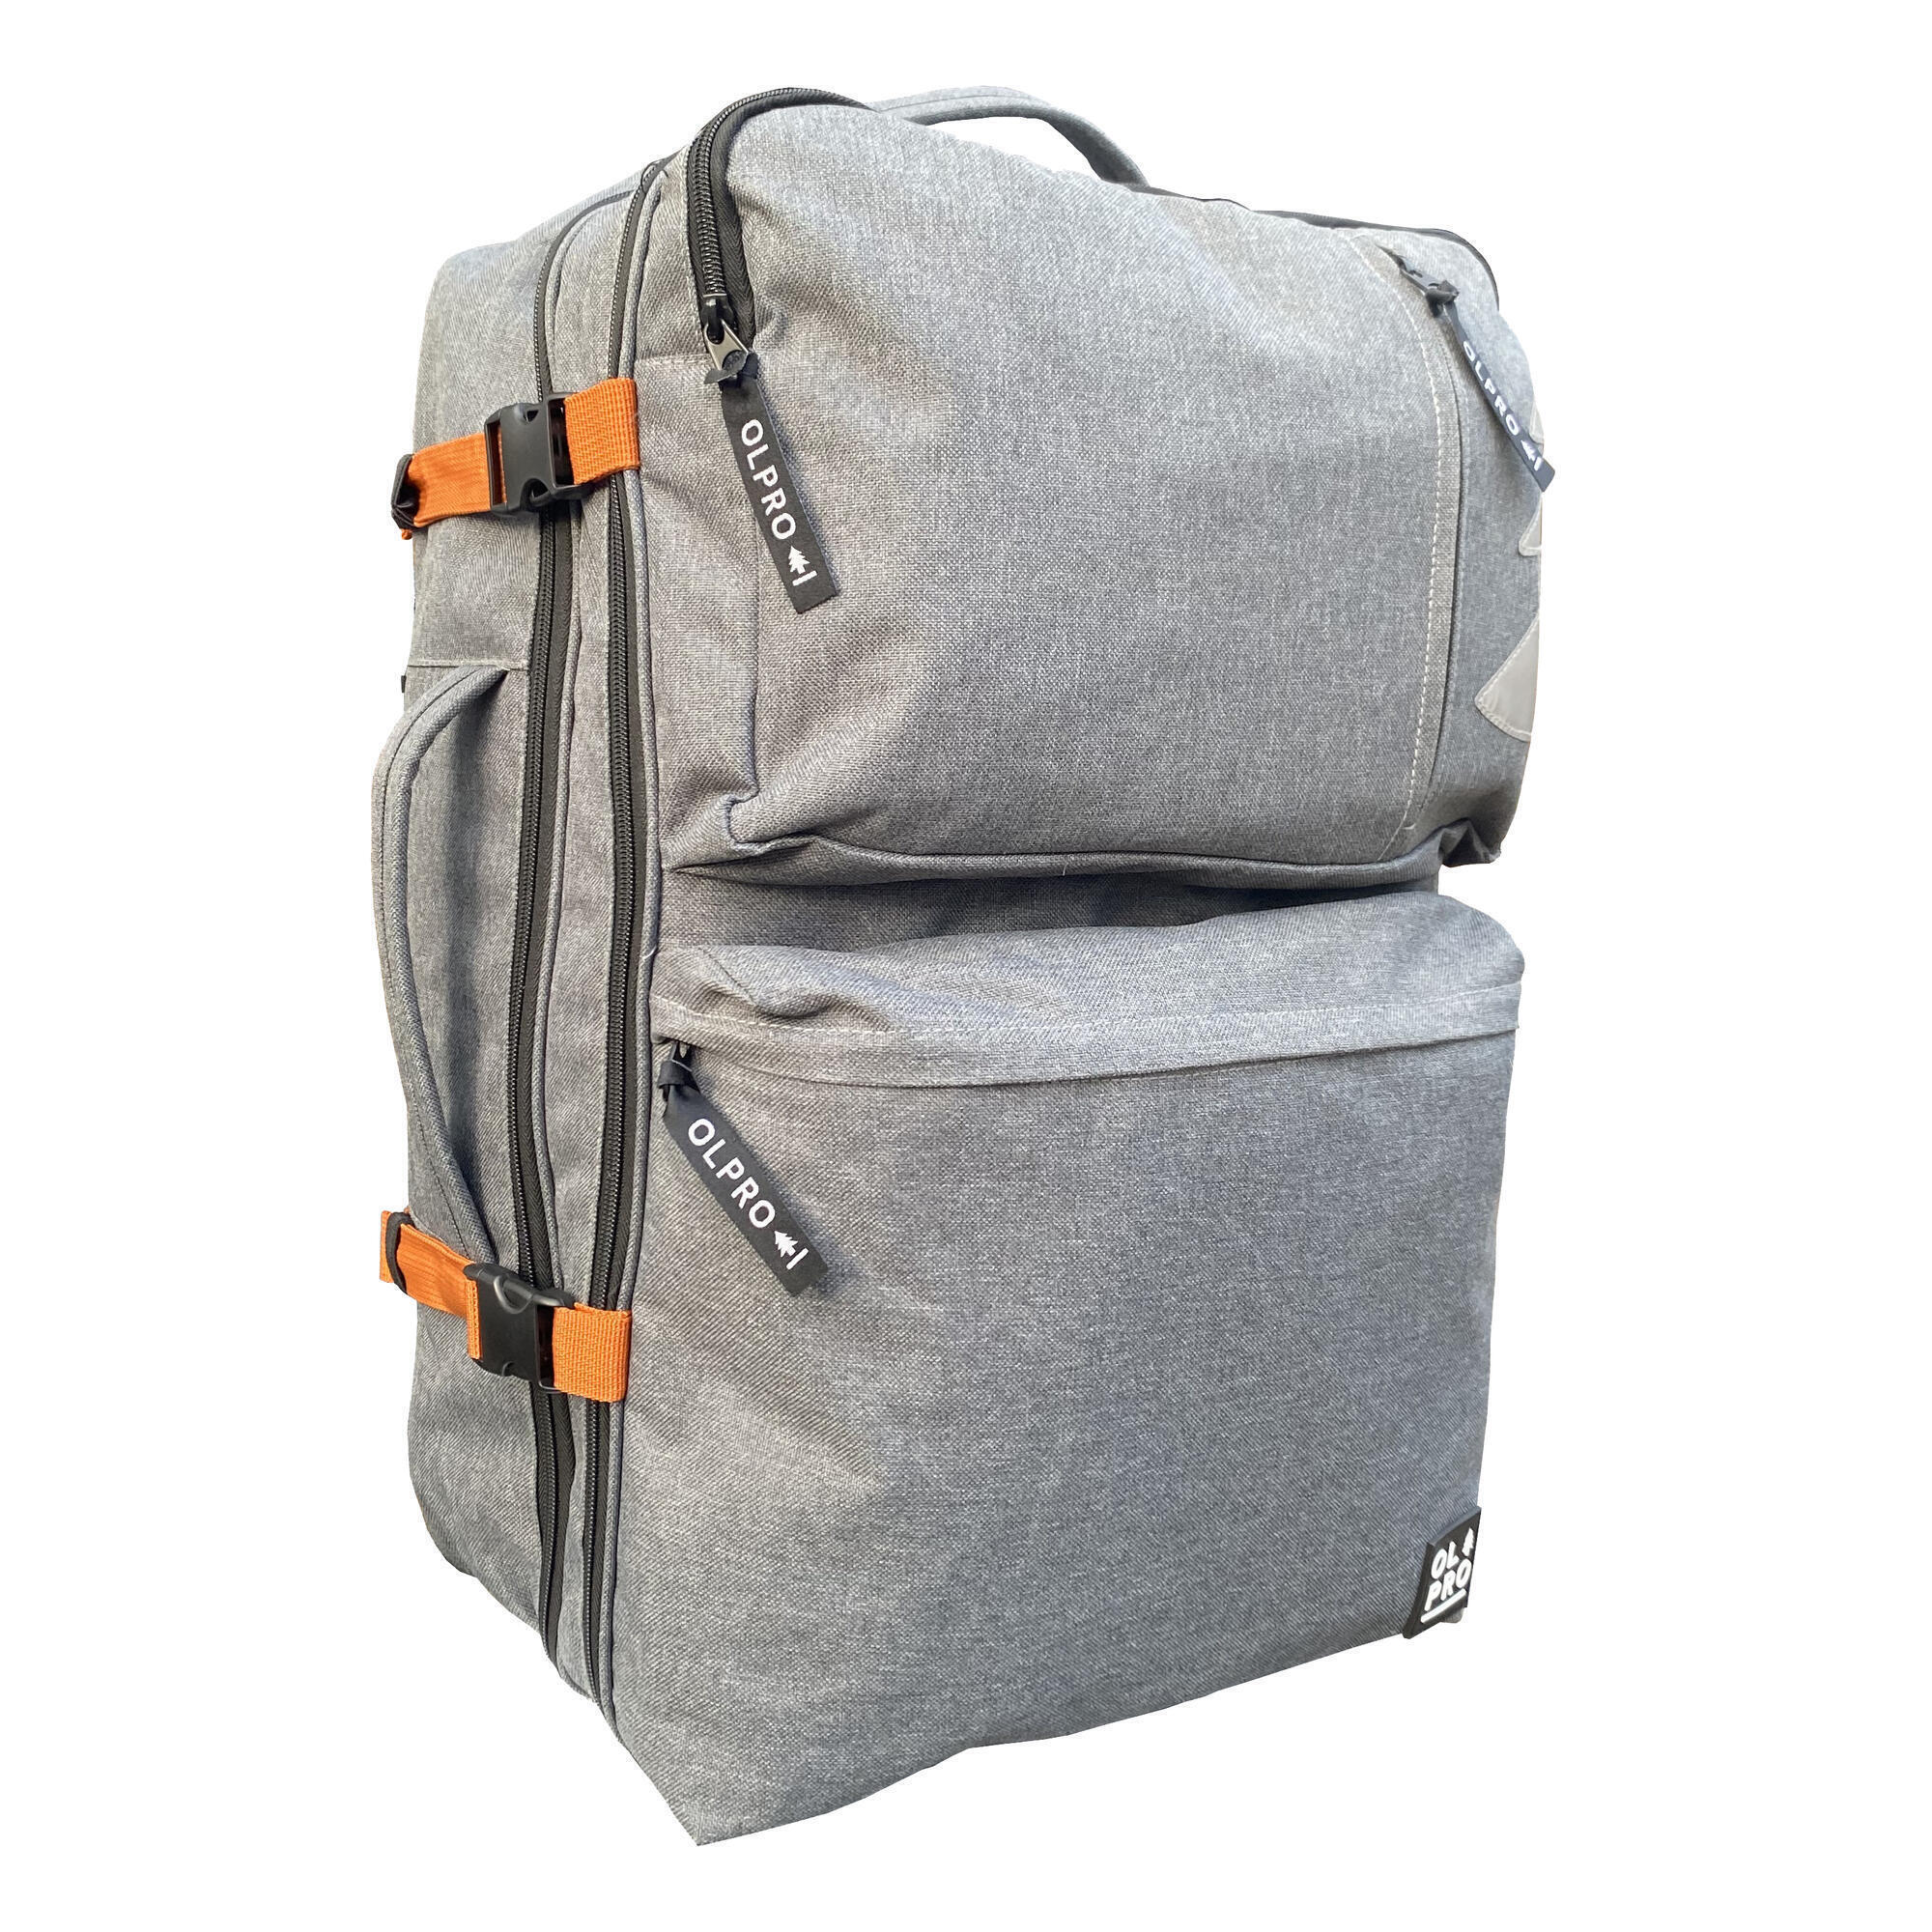 OLPRO OLPRO 44L Travel/Cabin Backpack